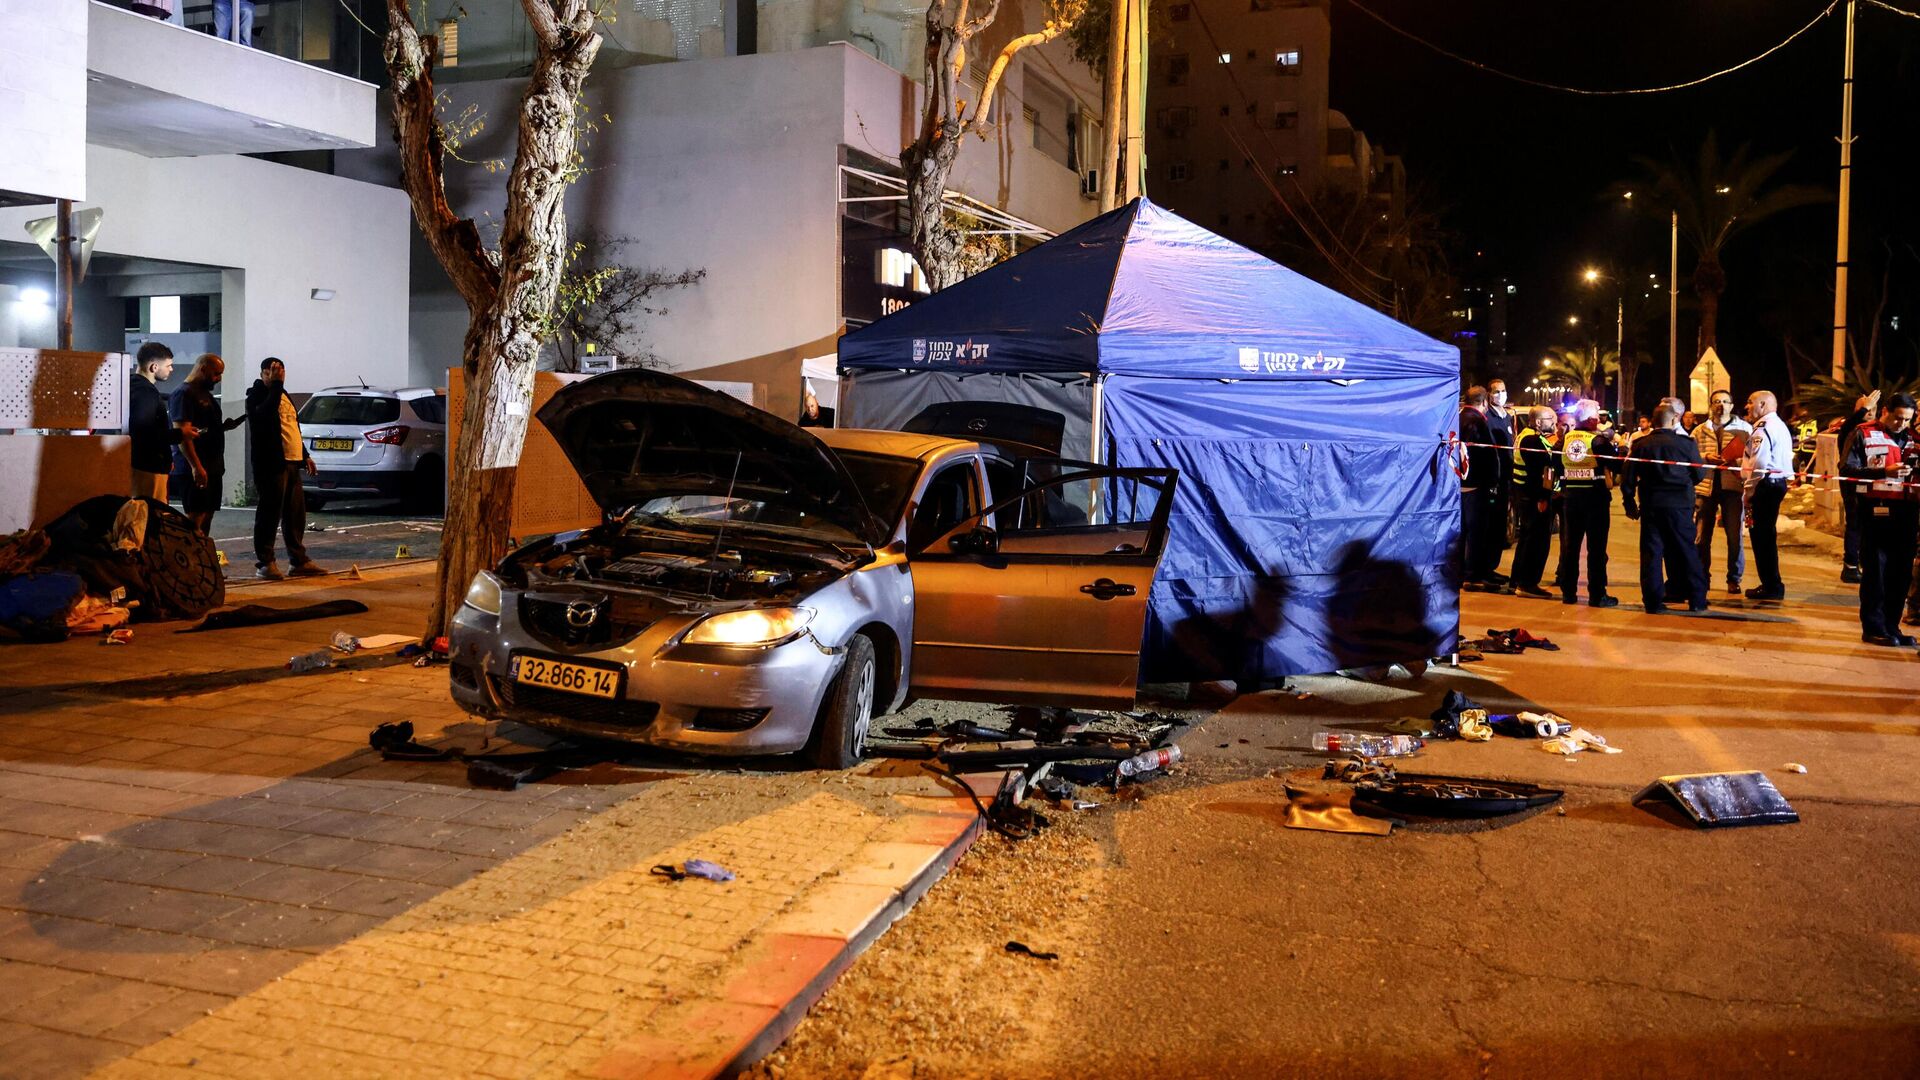 The wreckage of gunmens' car is seen following an attack in which people were killed on a main street in Hadera, Israel, March 27, 2022. REUTERS/Ronen Zvulun - Sputnik International, 1920, 28.03.2022